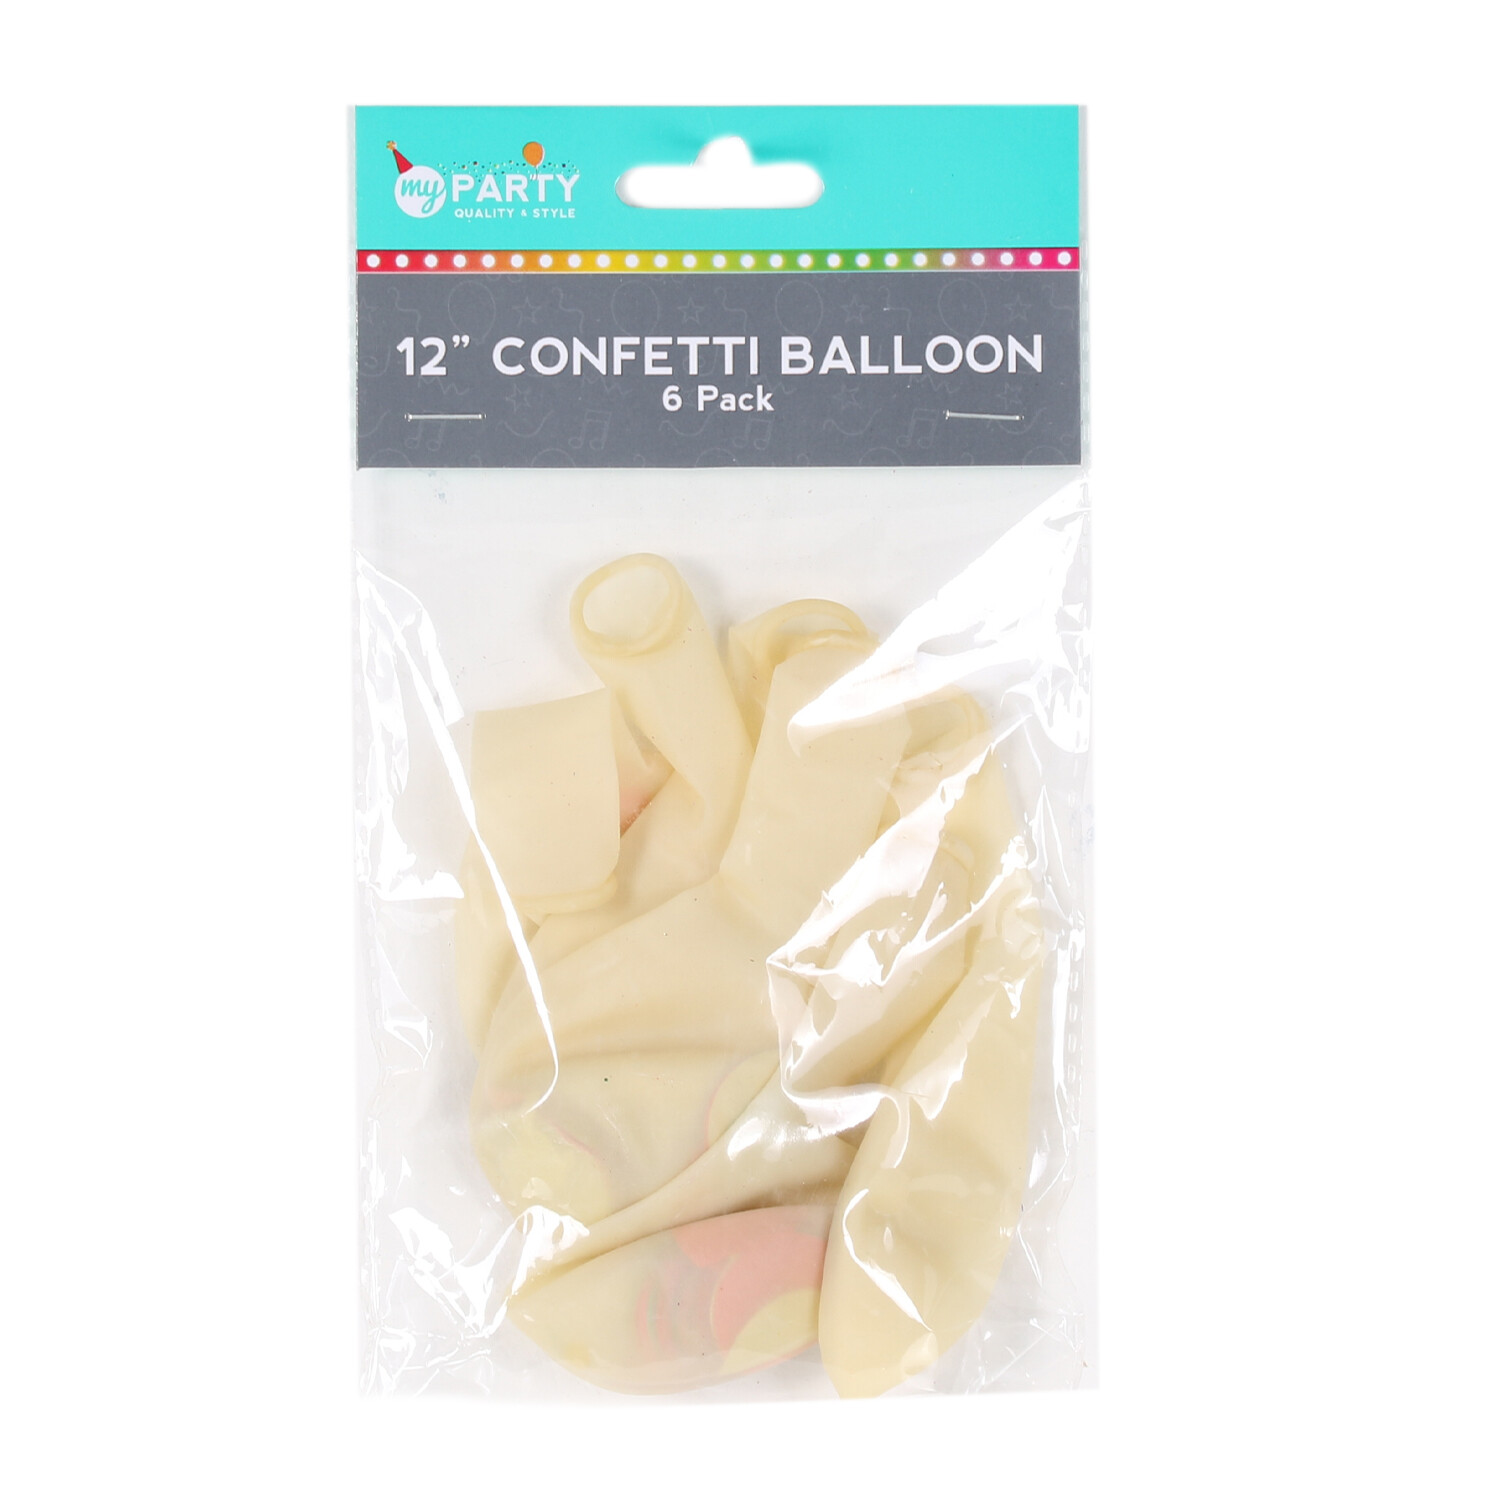 Pack of 6 12" Confetti Balloons Image